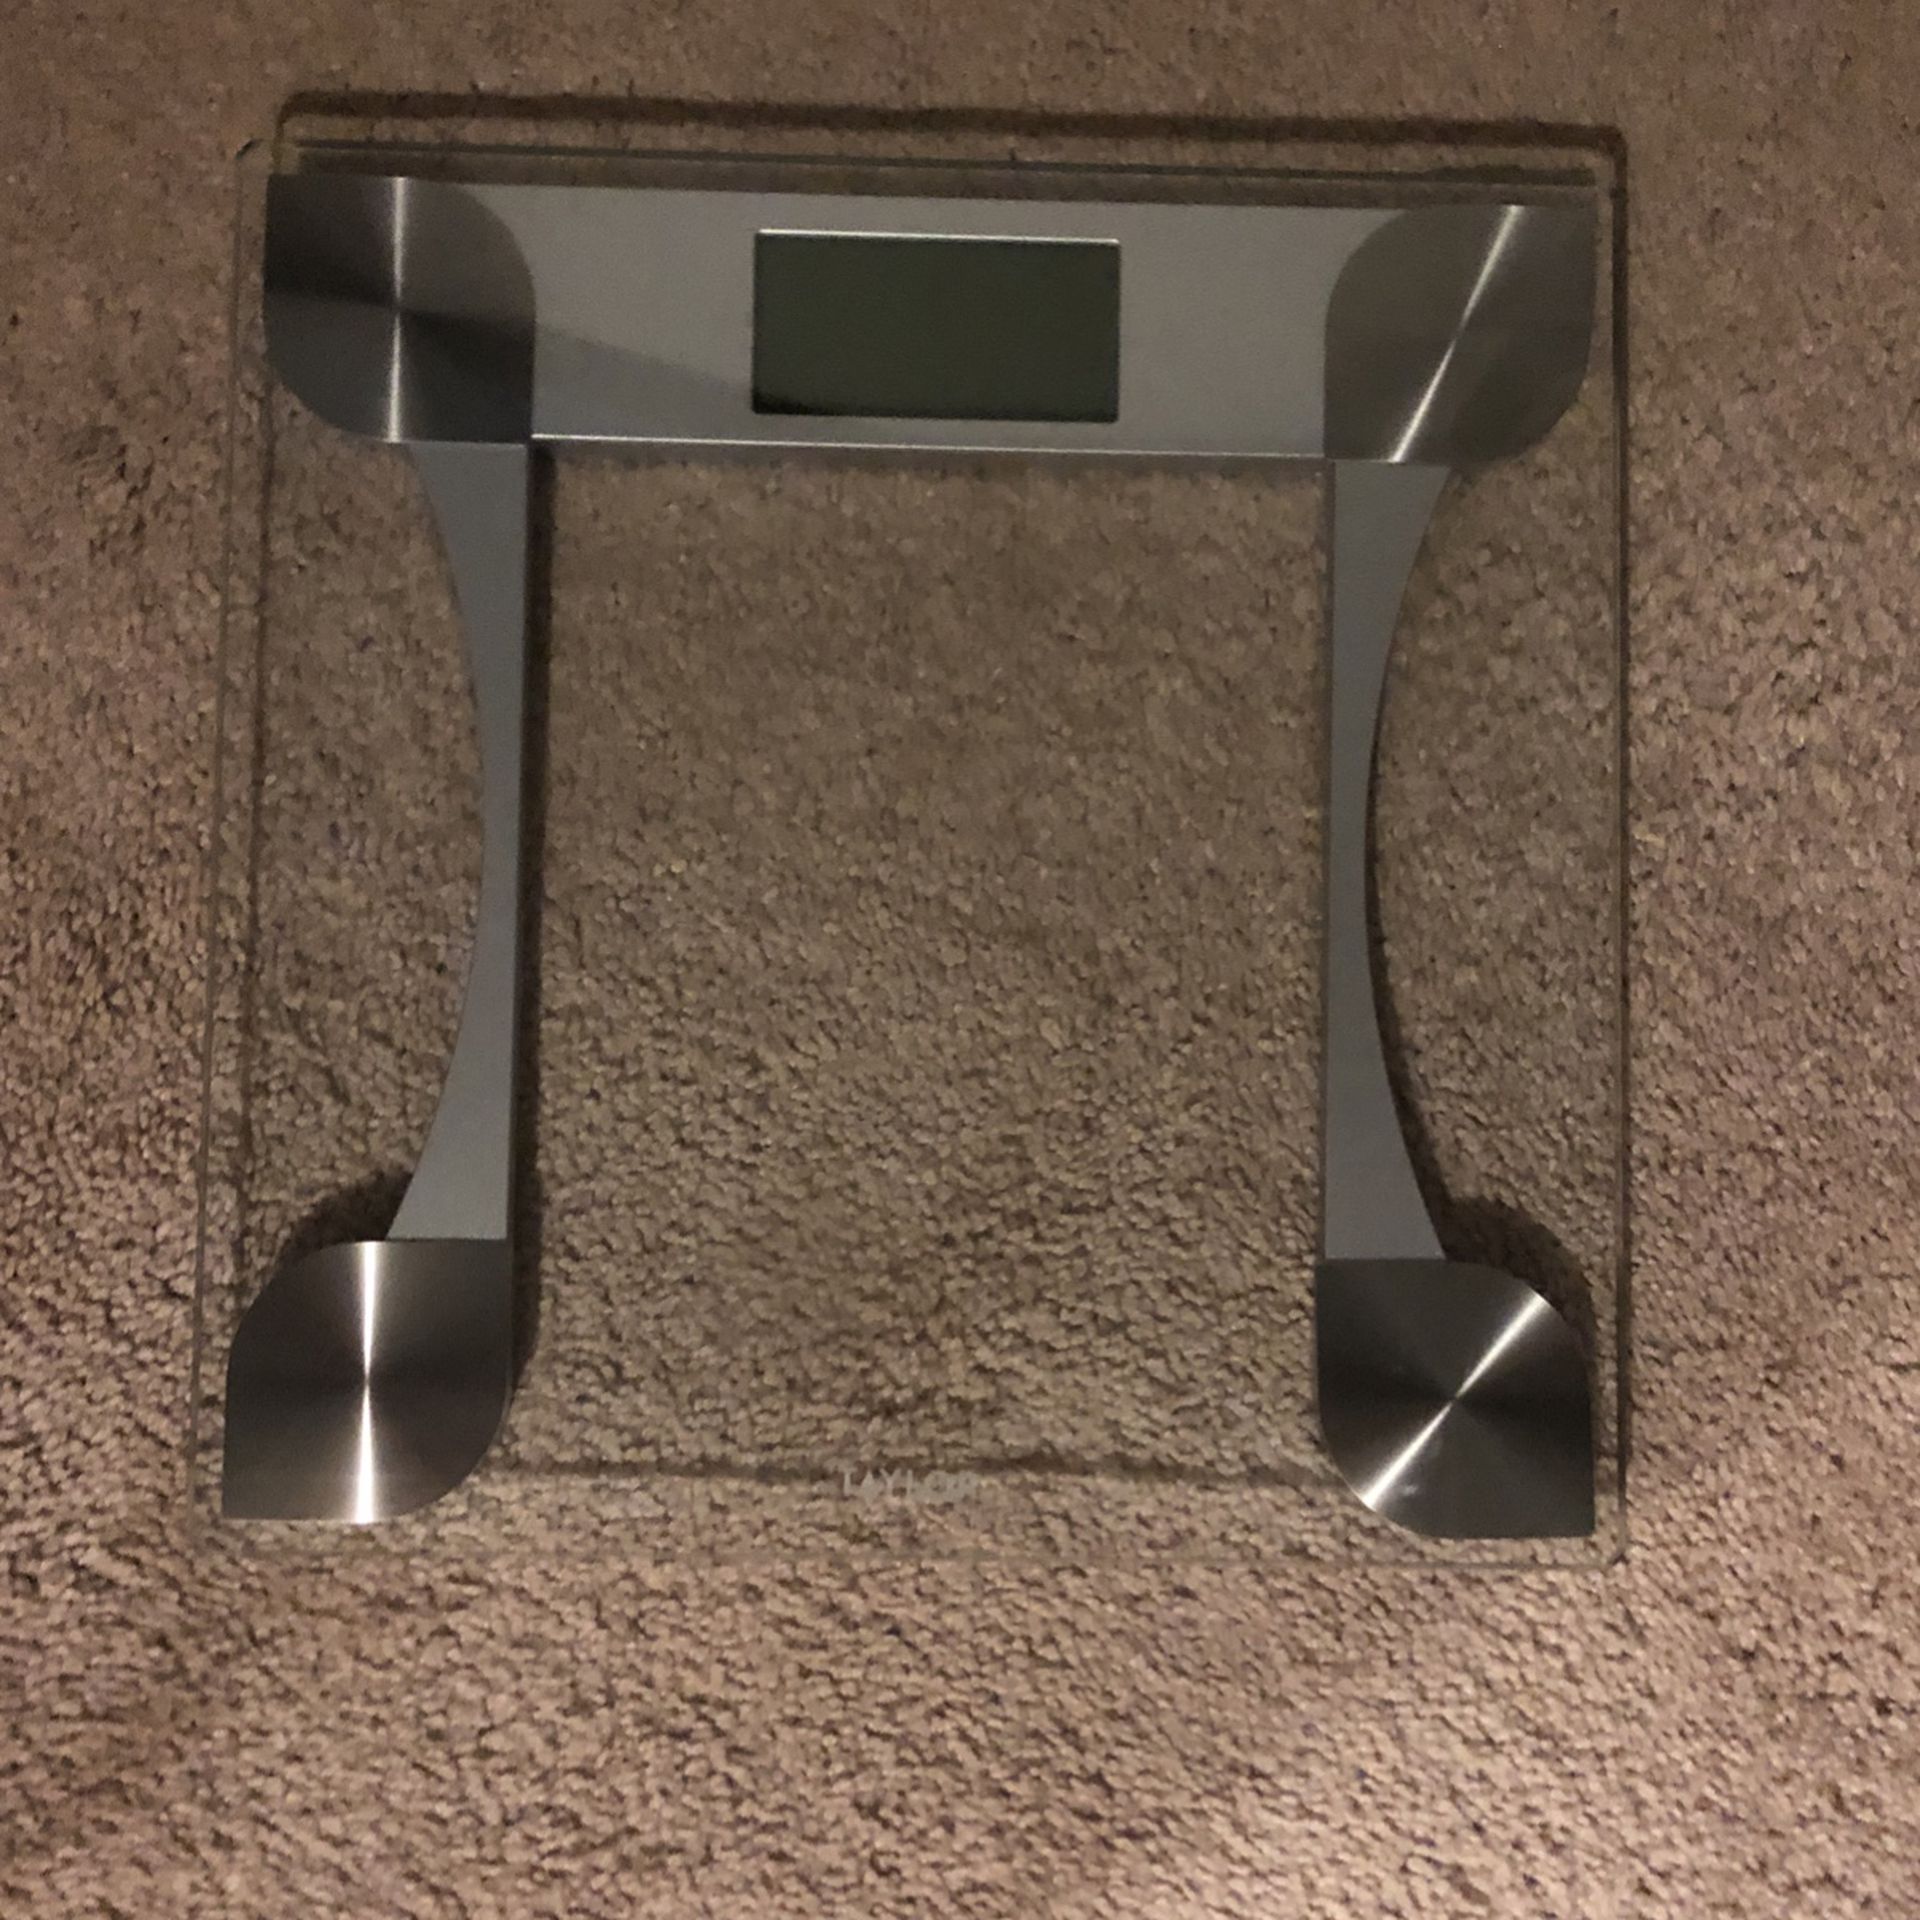 Glass Weight Tracking Scale $10